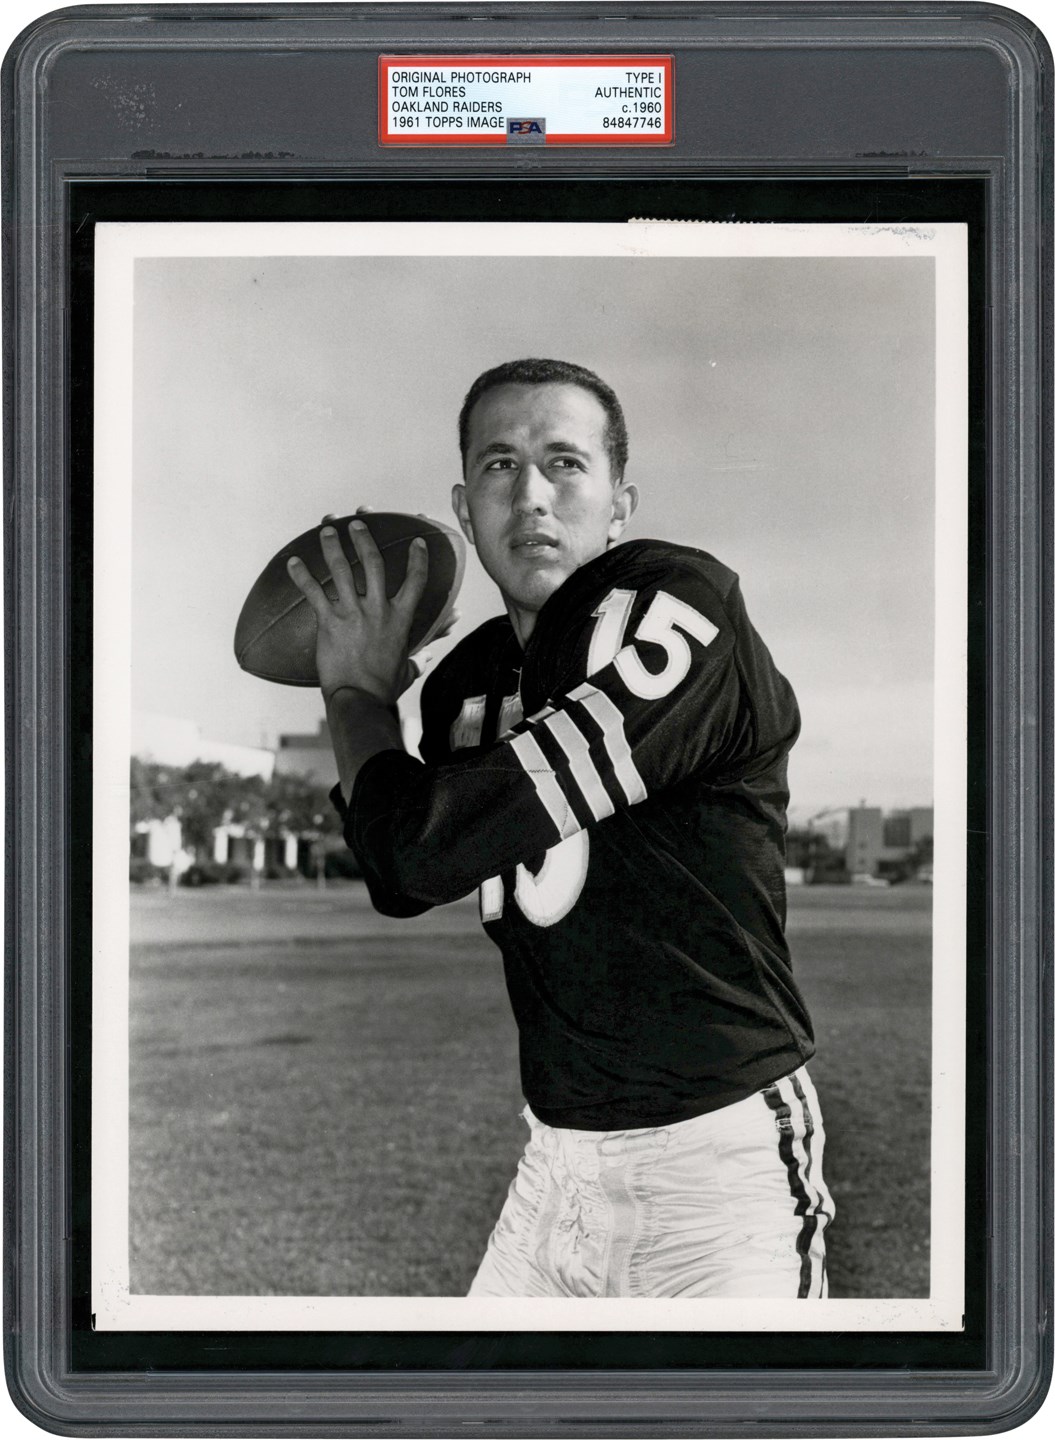 Vintage Sports Photographs - Tom Flores Original Photograph Used For His 1961 Toops & Fleer Football Cards (PSA Type I)